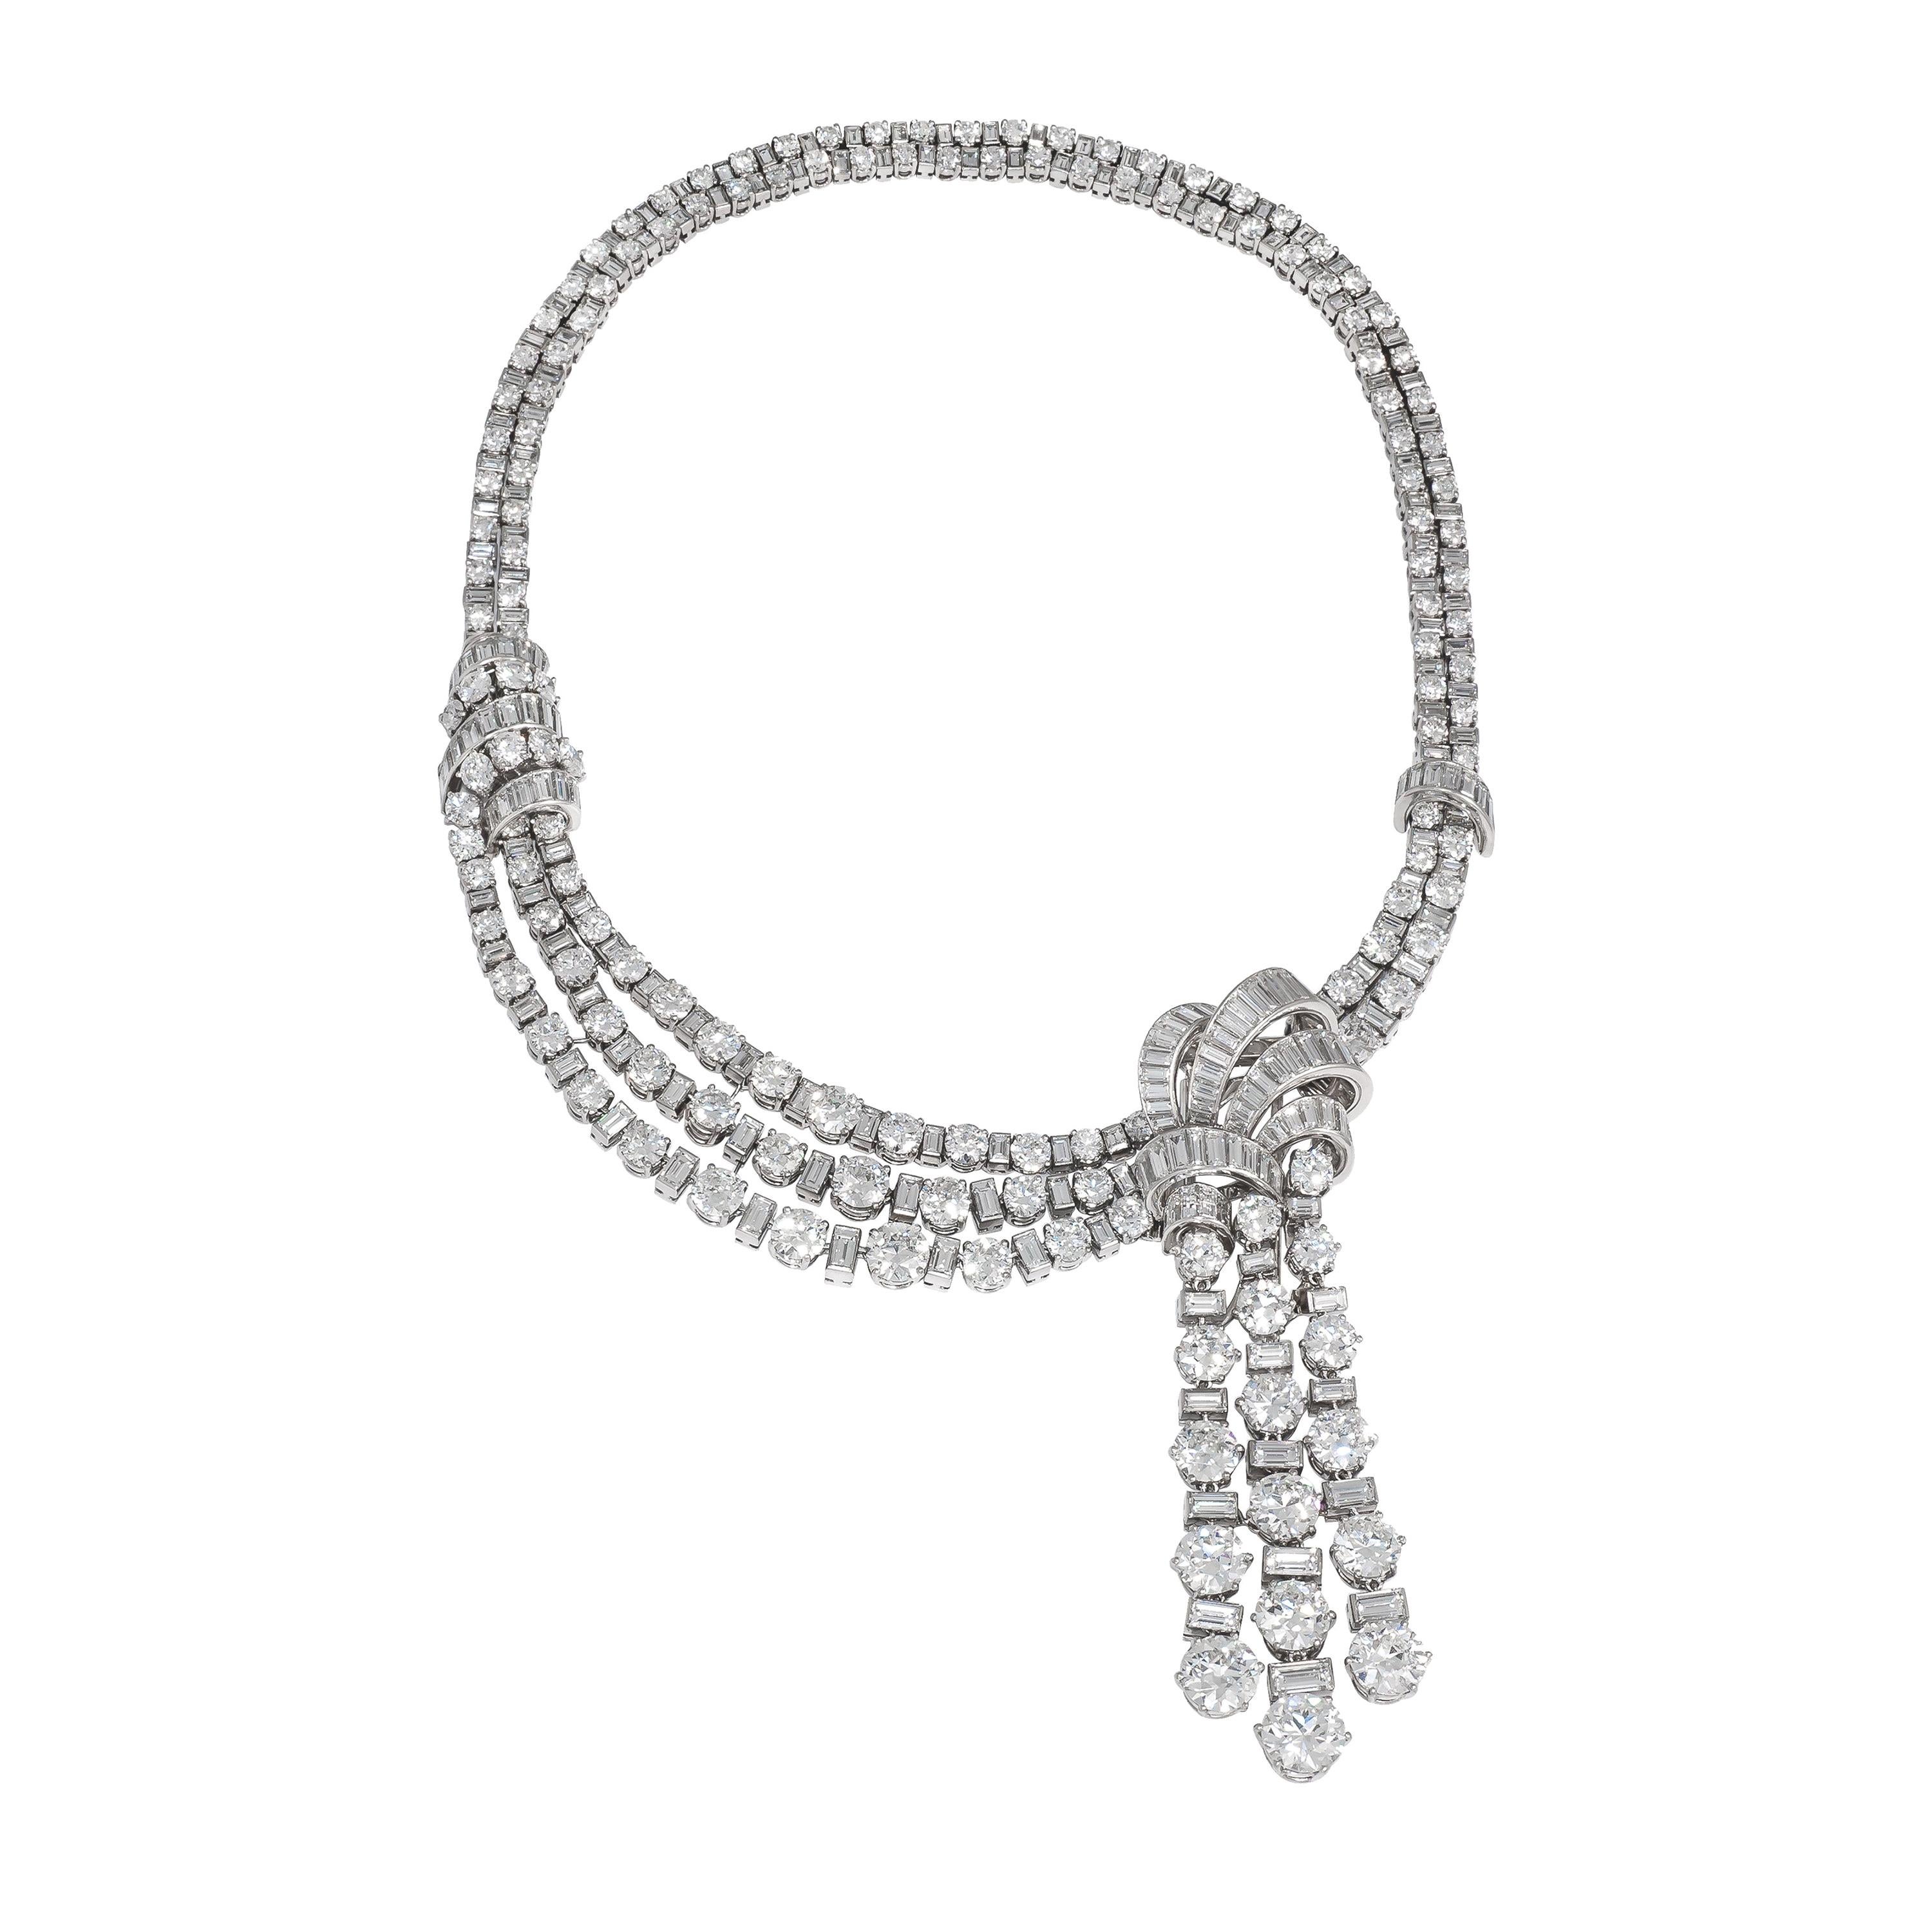 89.84 TCW Diamond Necklace and Removable Diamond Brooch in Platinum & White Gold